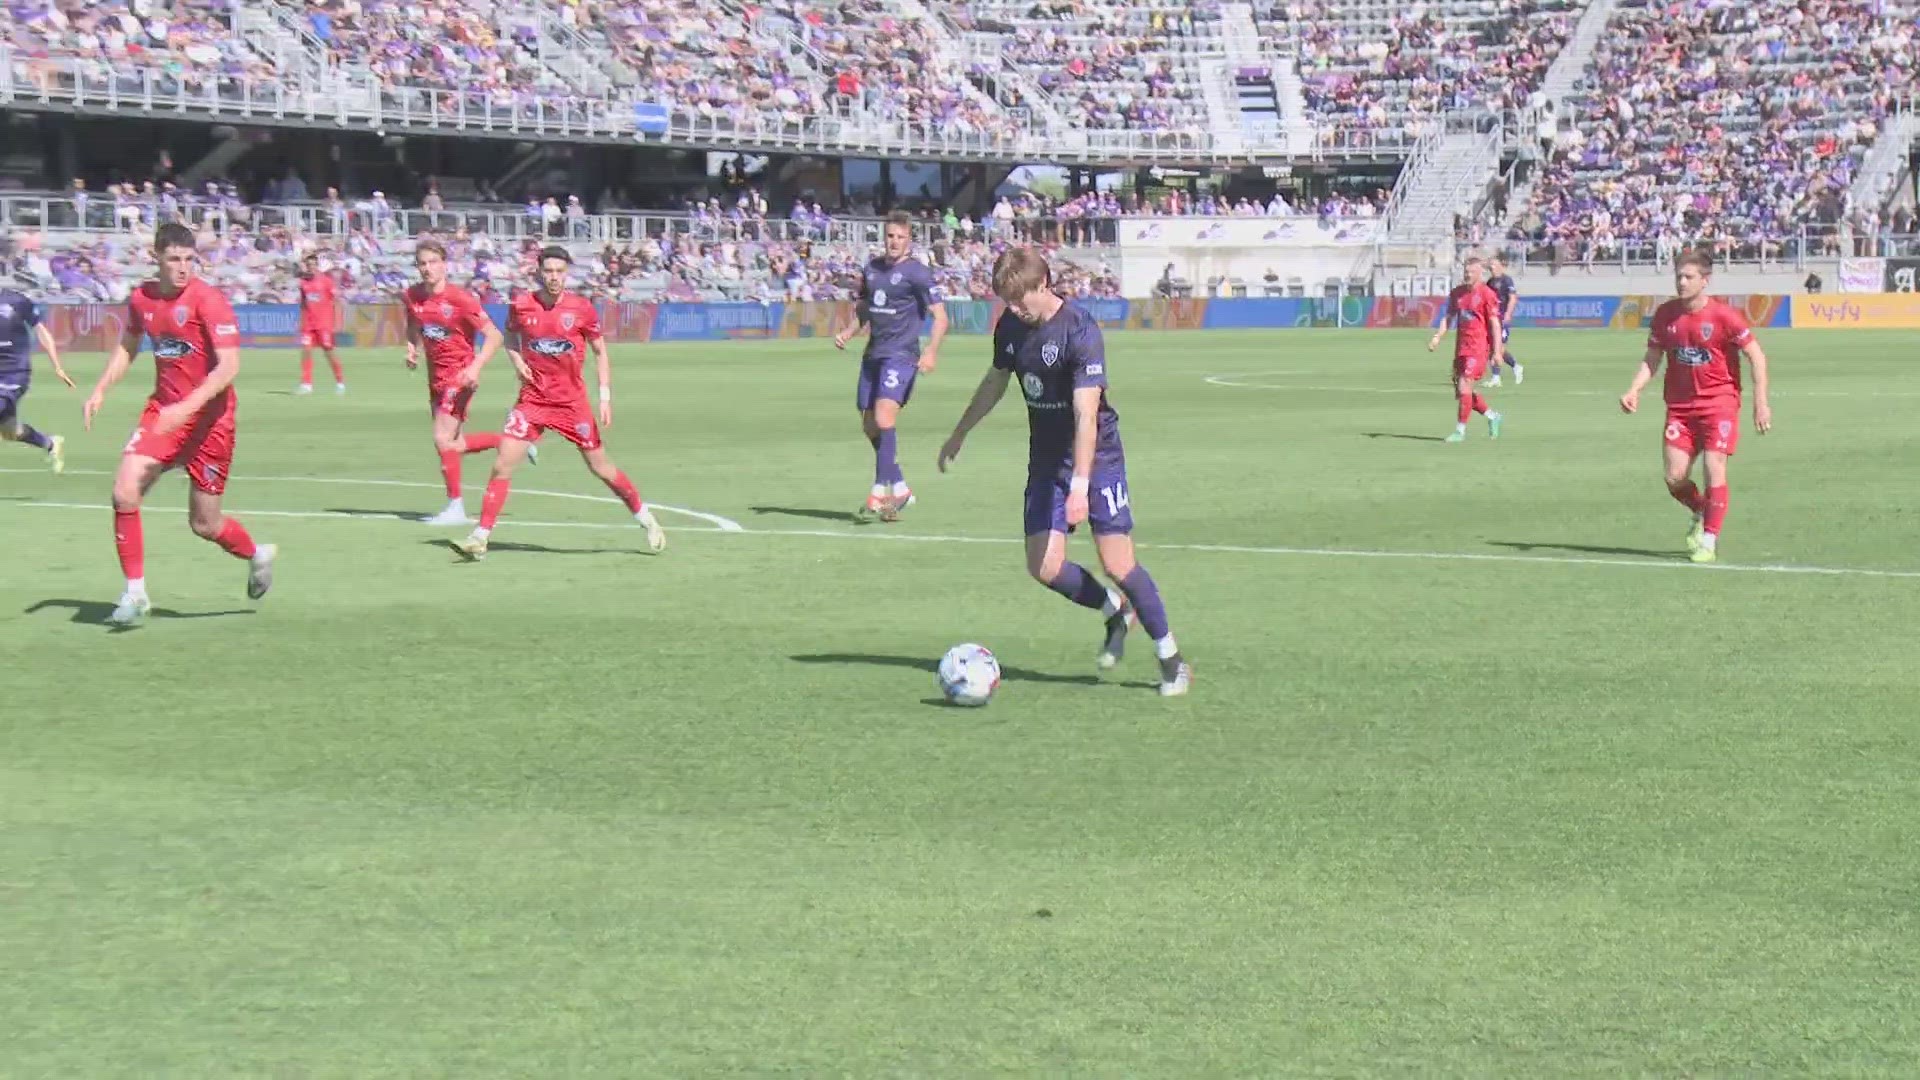 Lou City topped the Indy Eleven on Saturday.